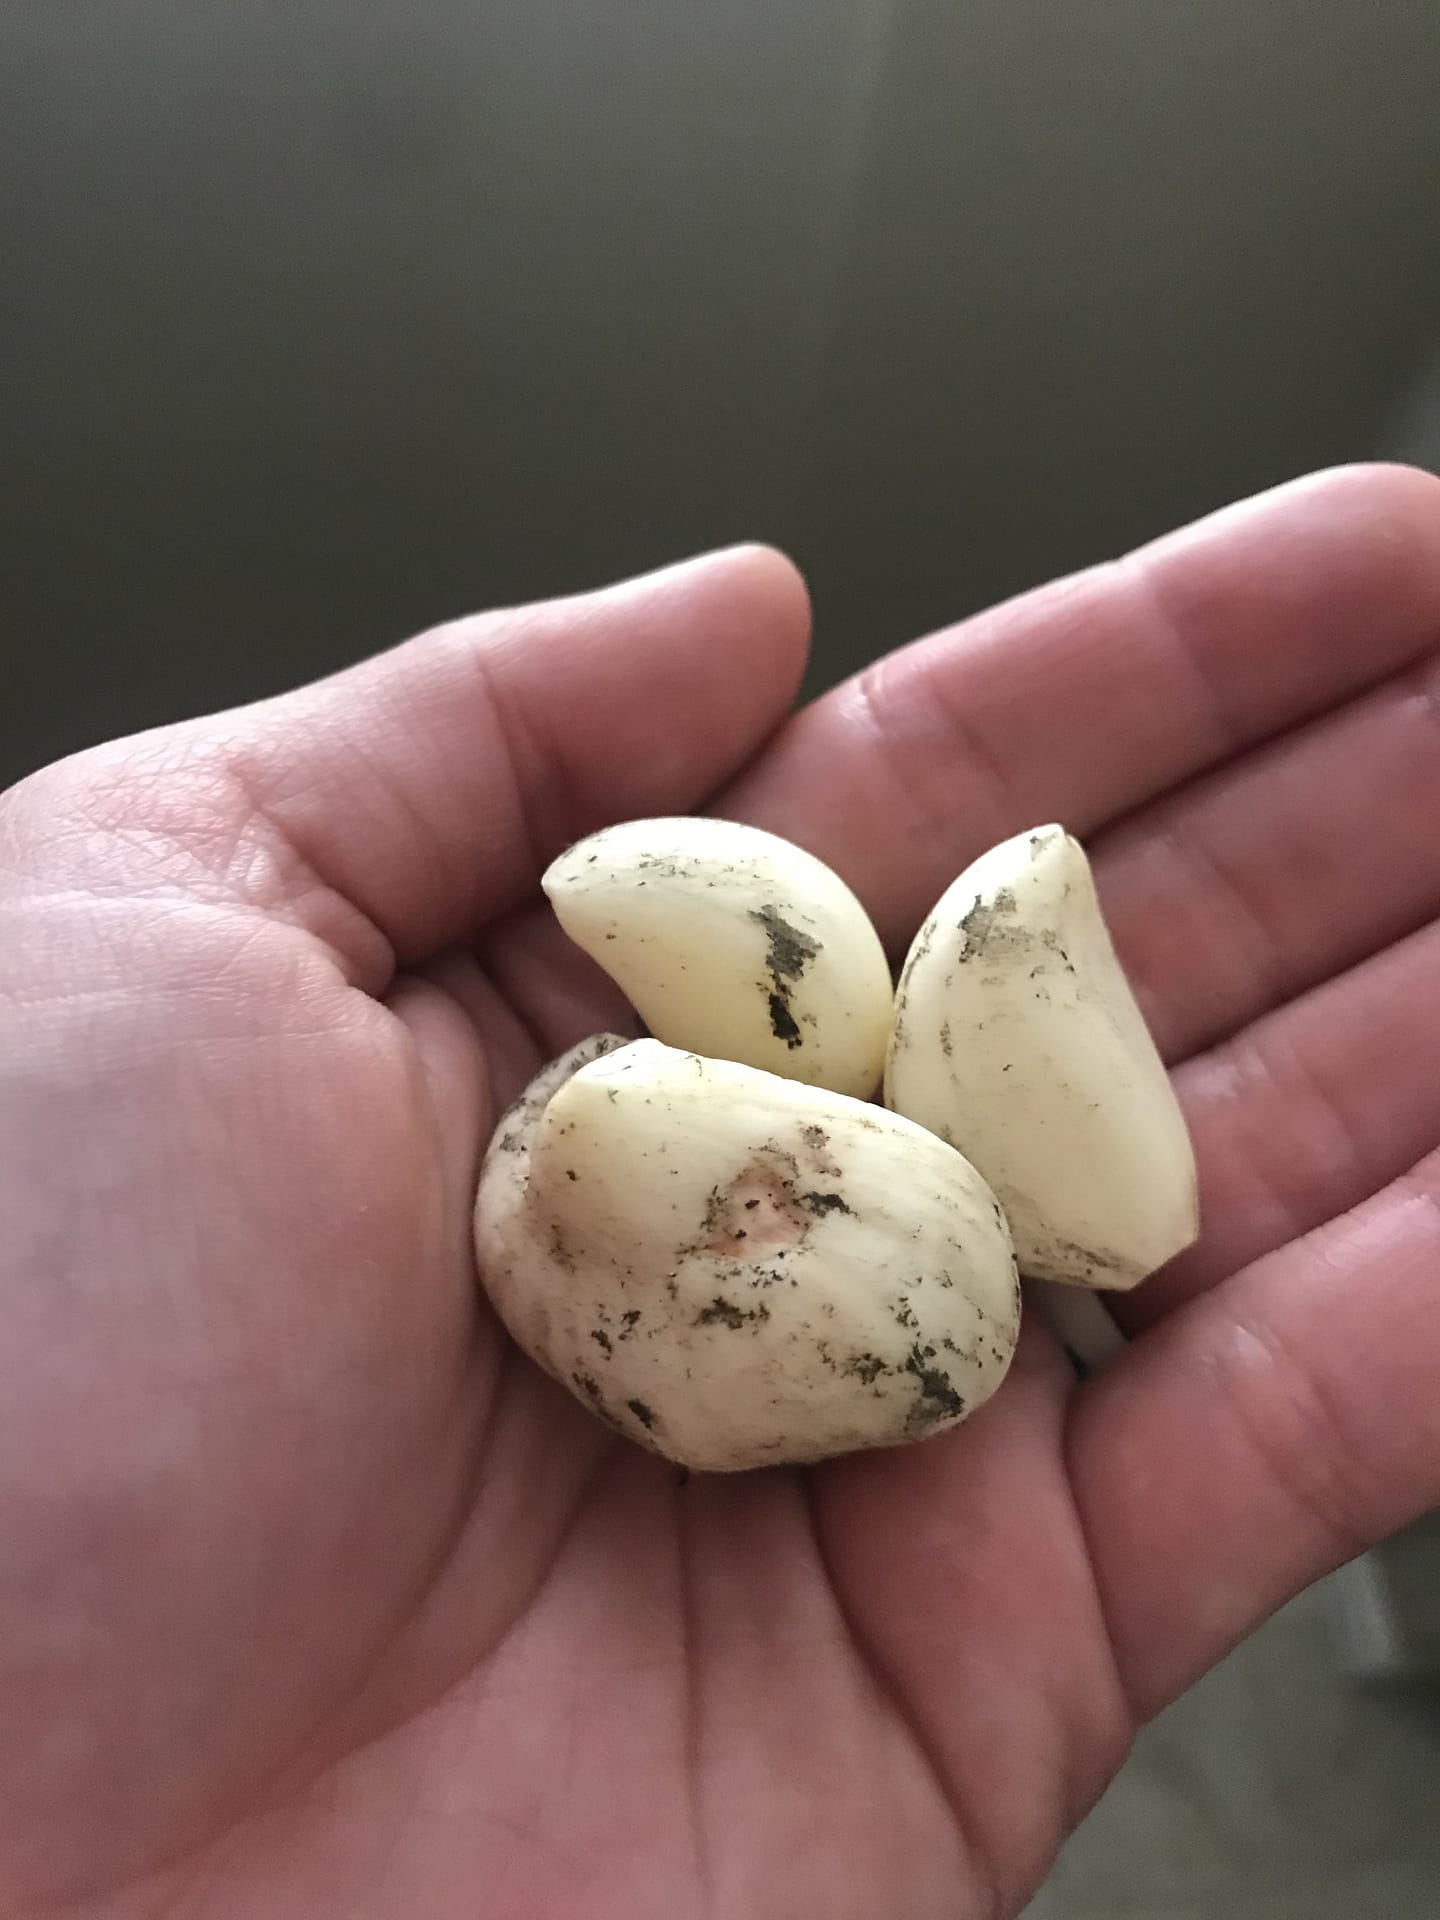 Angie's recipe garden shows off 3 garlic cloves she harvested, these will pair great with the tomatoes